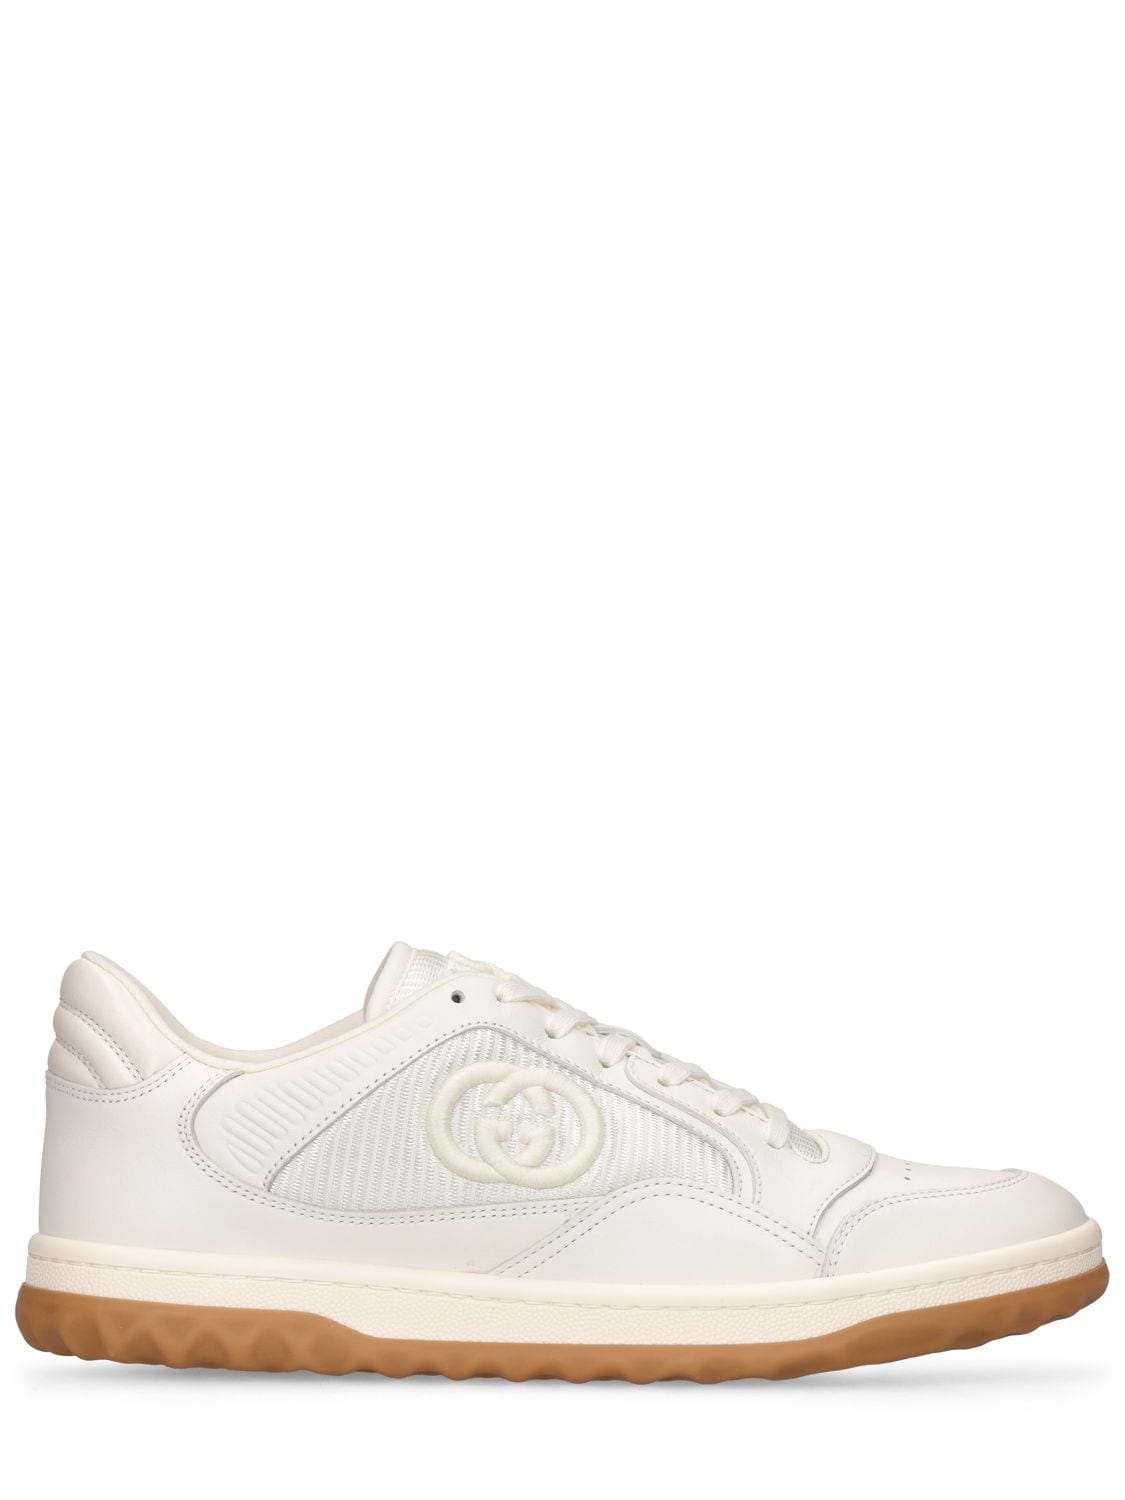 Gucci 20mm Leather Sneakers In White